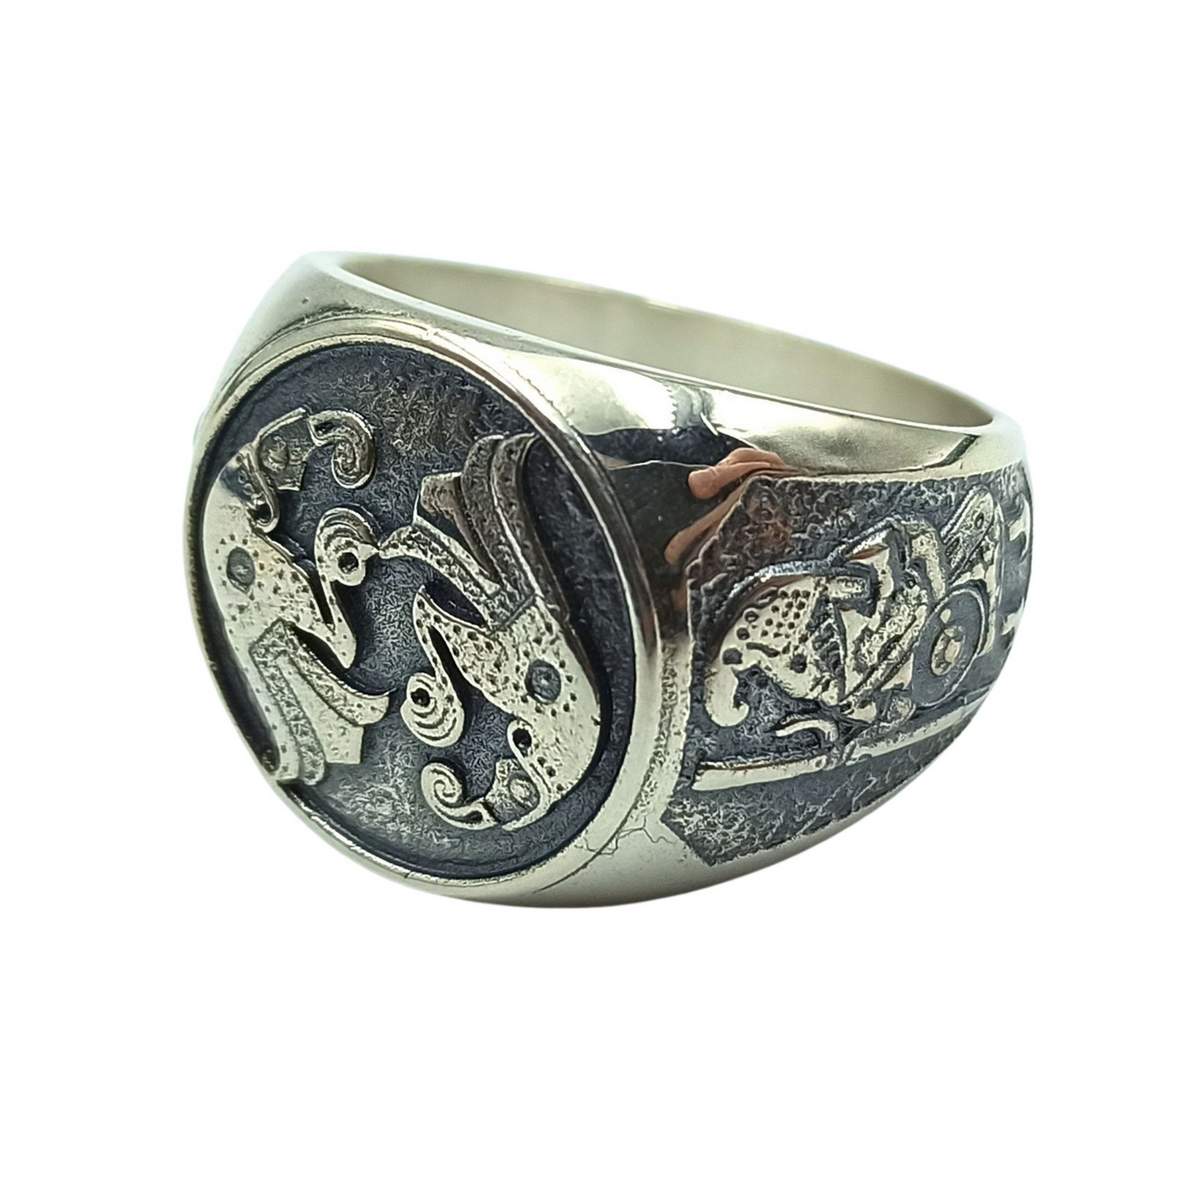 Norse raven silver ring 6 US/CA  